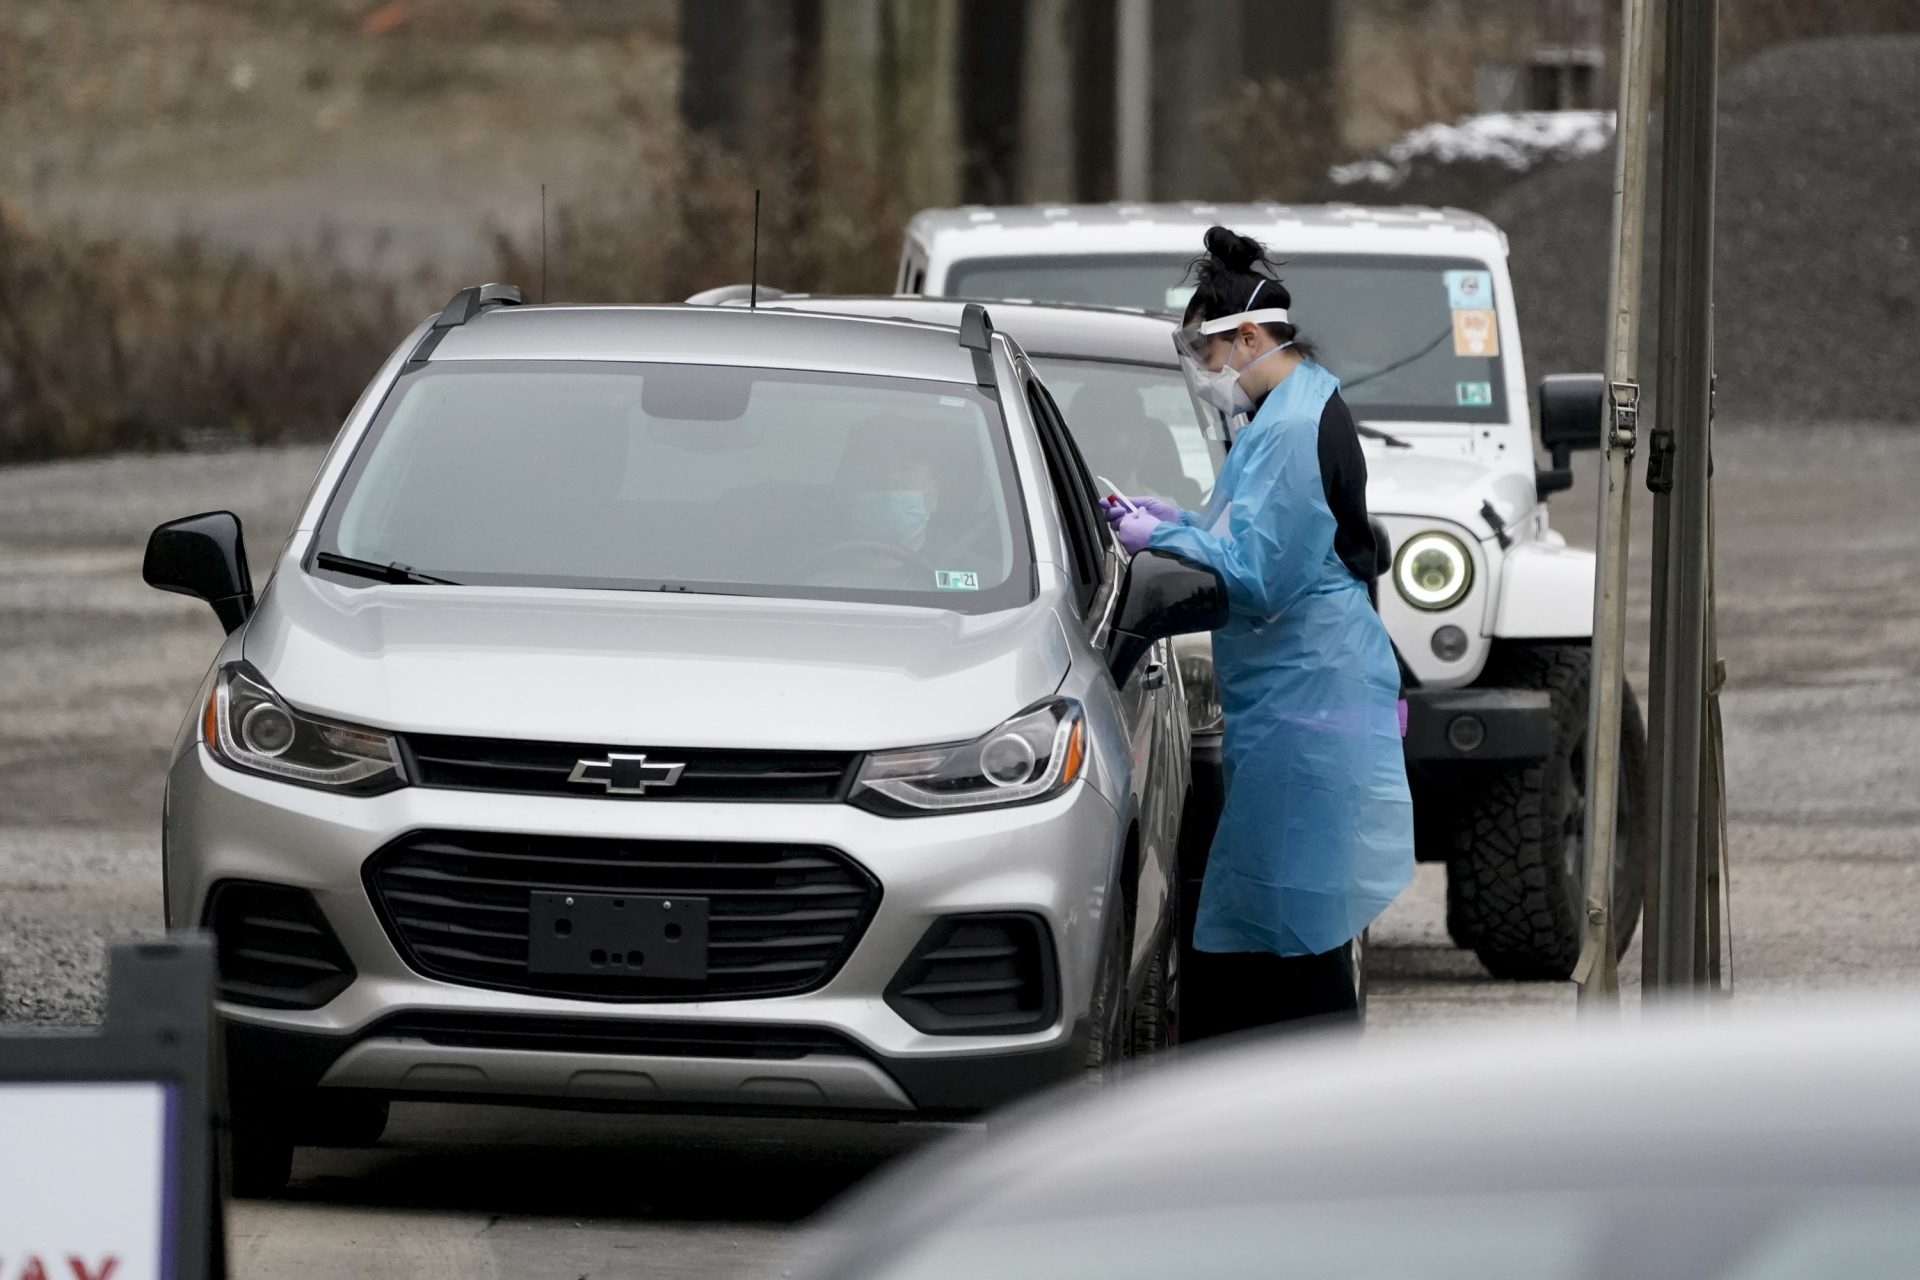 Health care workers start the process for COVID-19 testing at a drive-thru site, Friday, Dec. 4, 2020, in Butler, Pa.